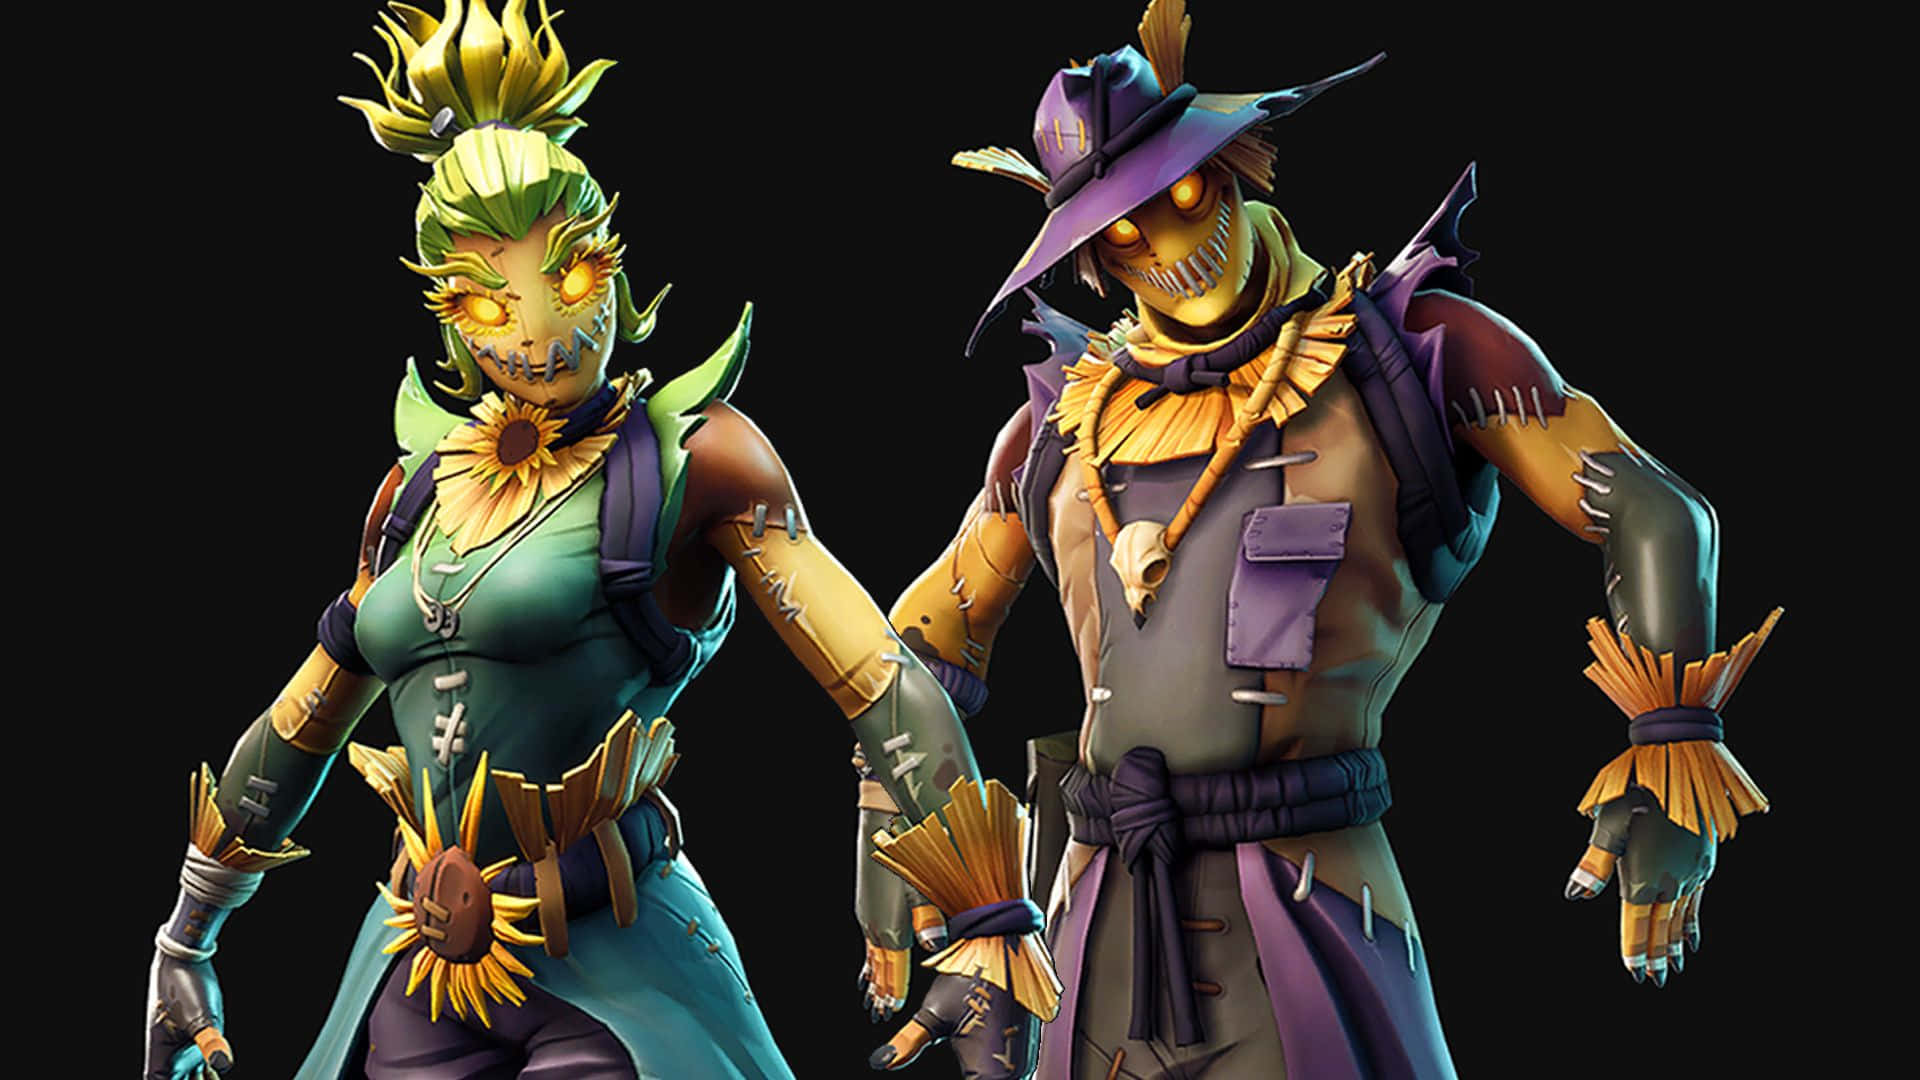 Engage in Battle with the Fortnite Character Wallpaper